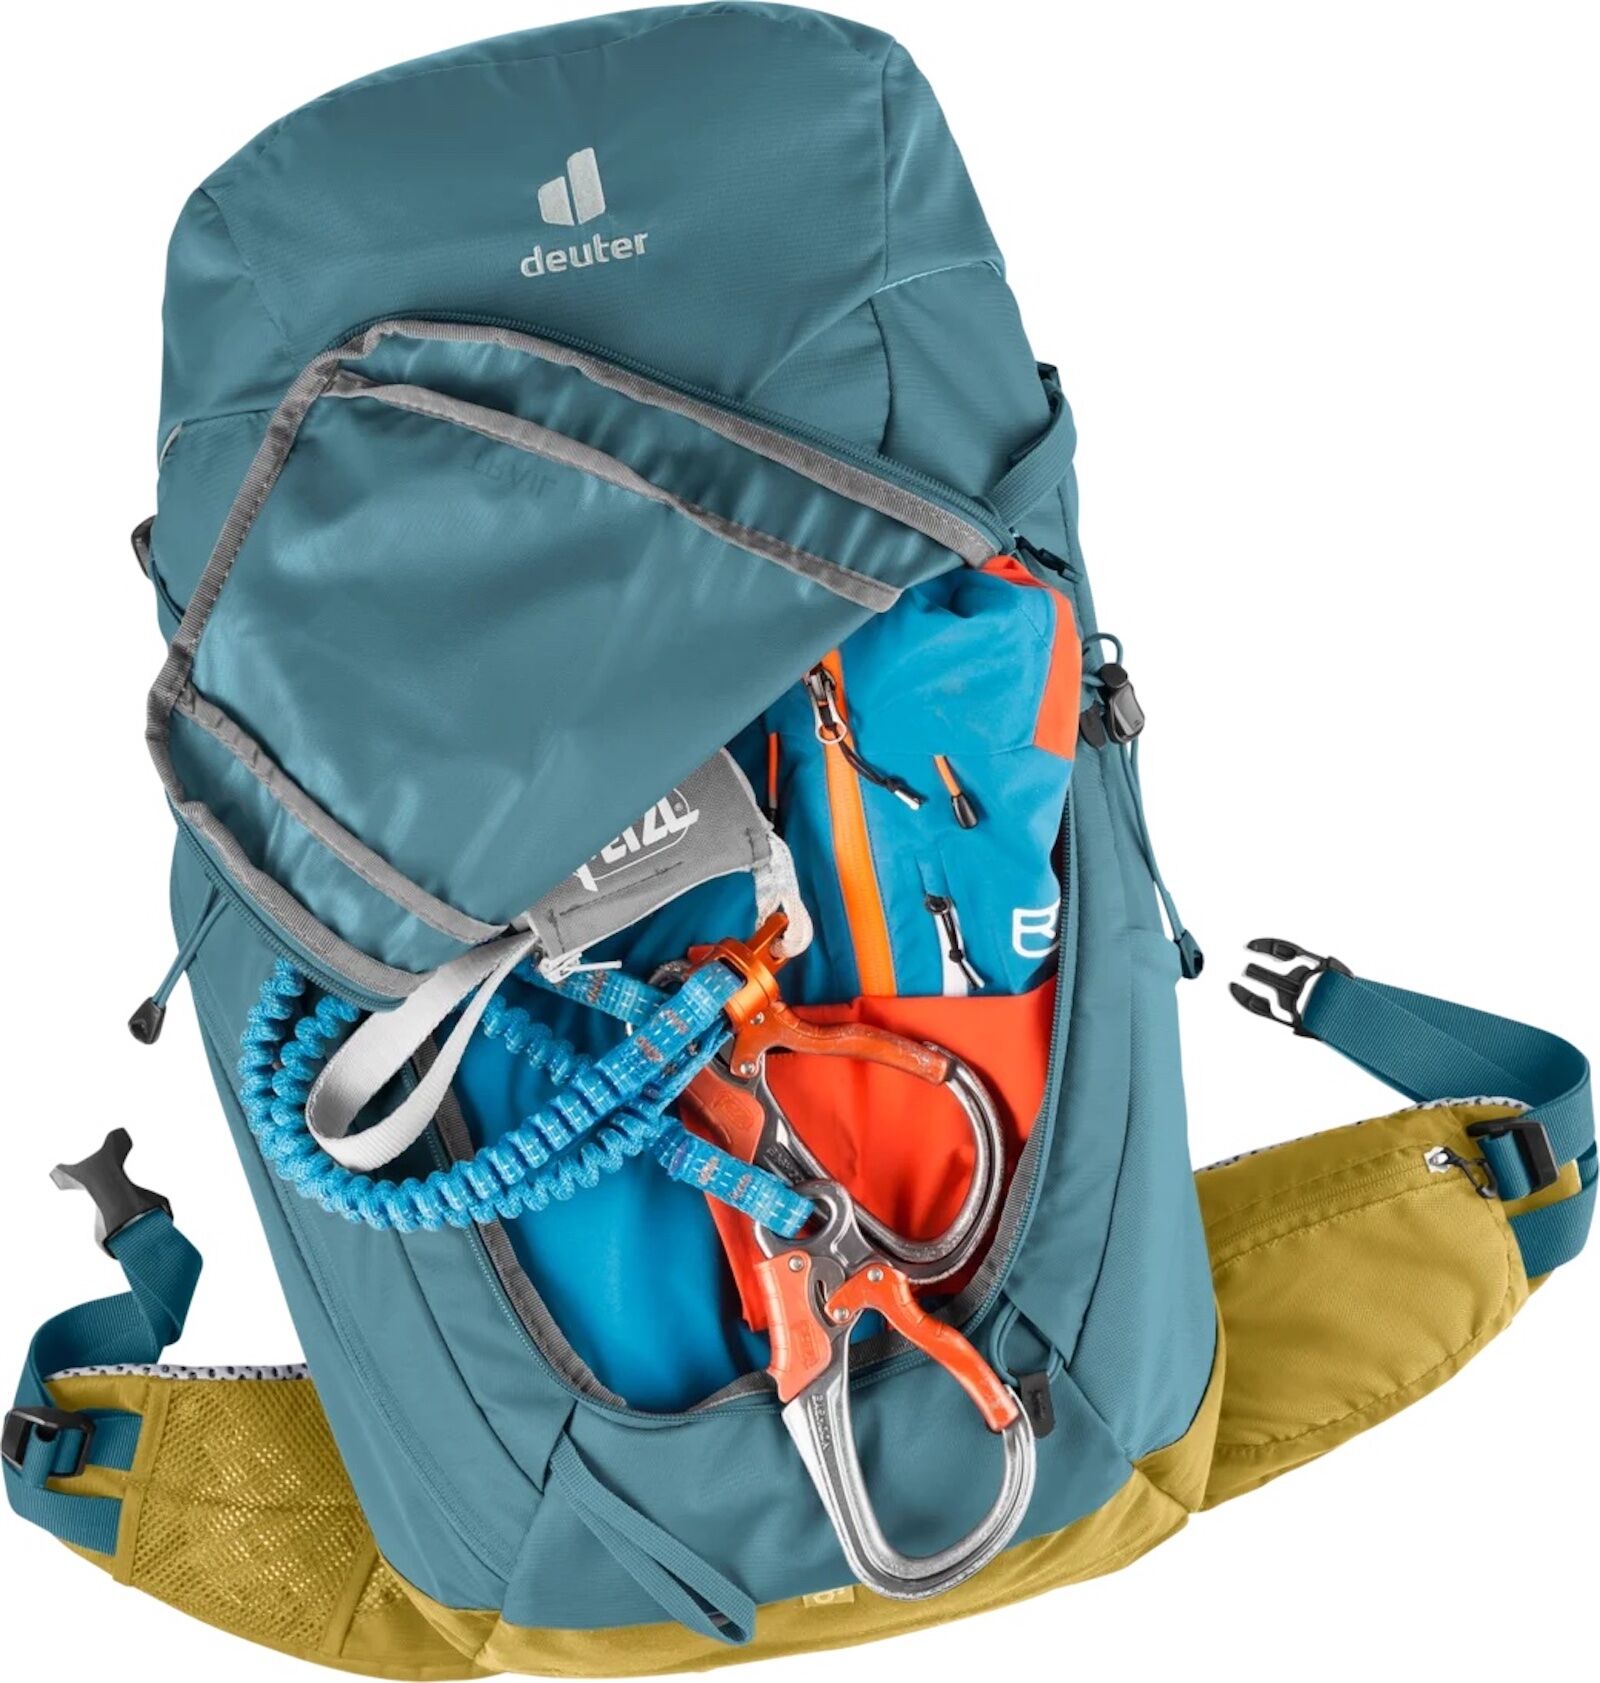 deuter trail 28 women's pack with gear